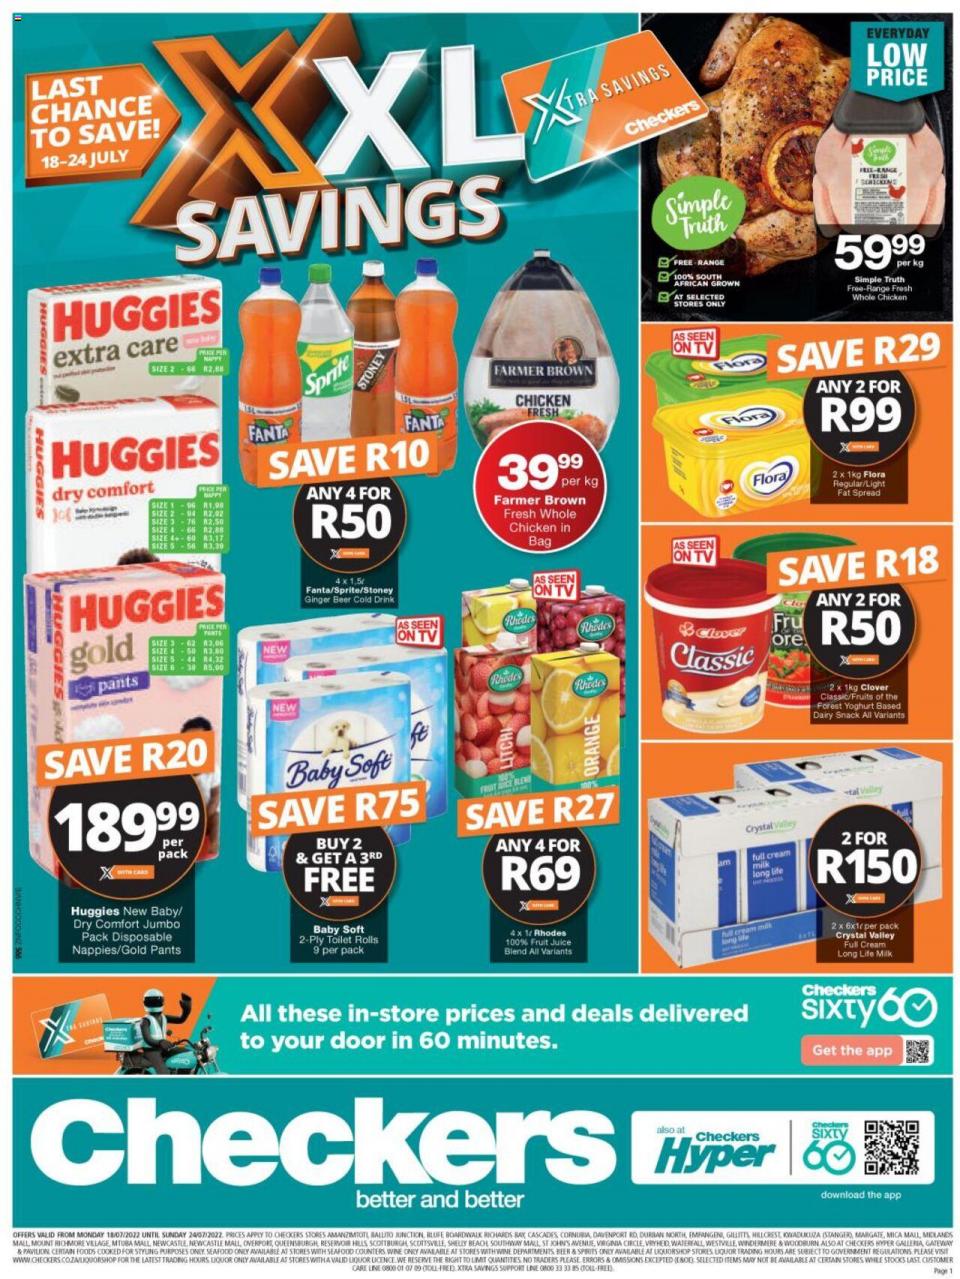 Checkers Specials XXL Savings 18 – 24 July 2022